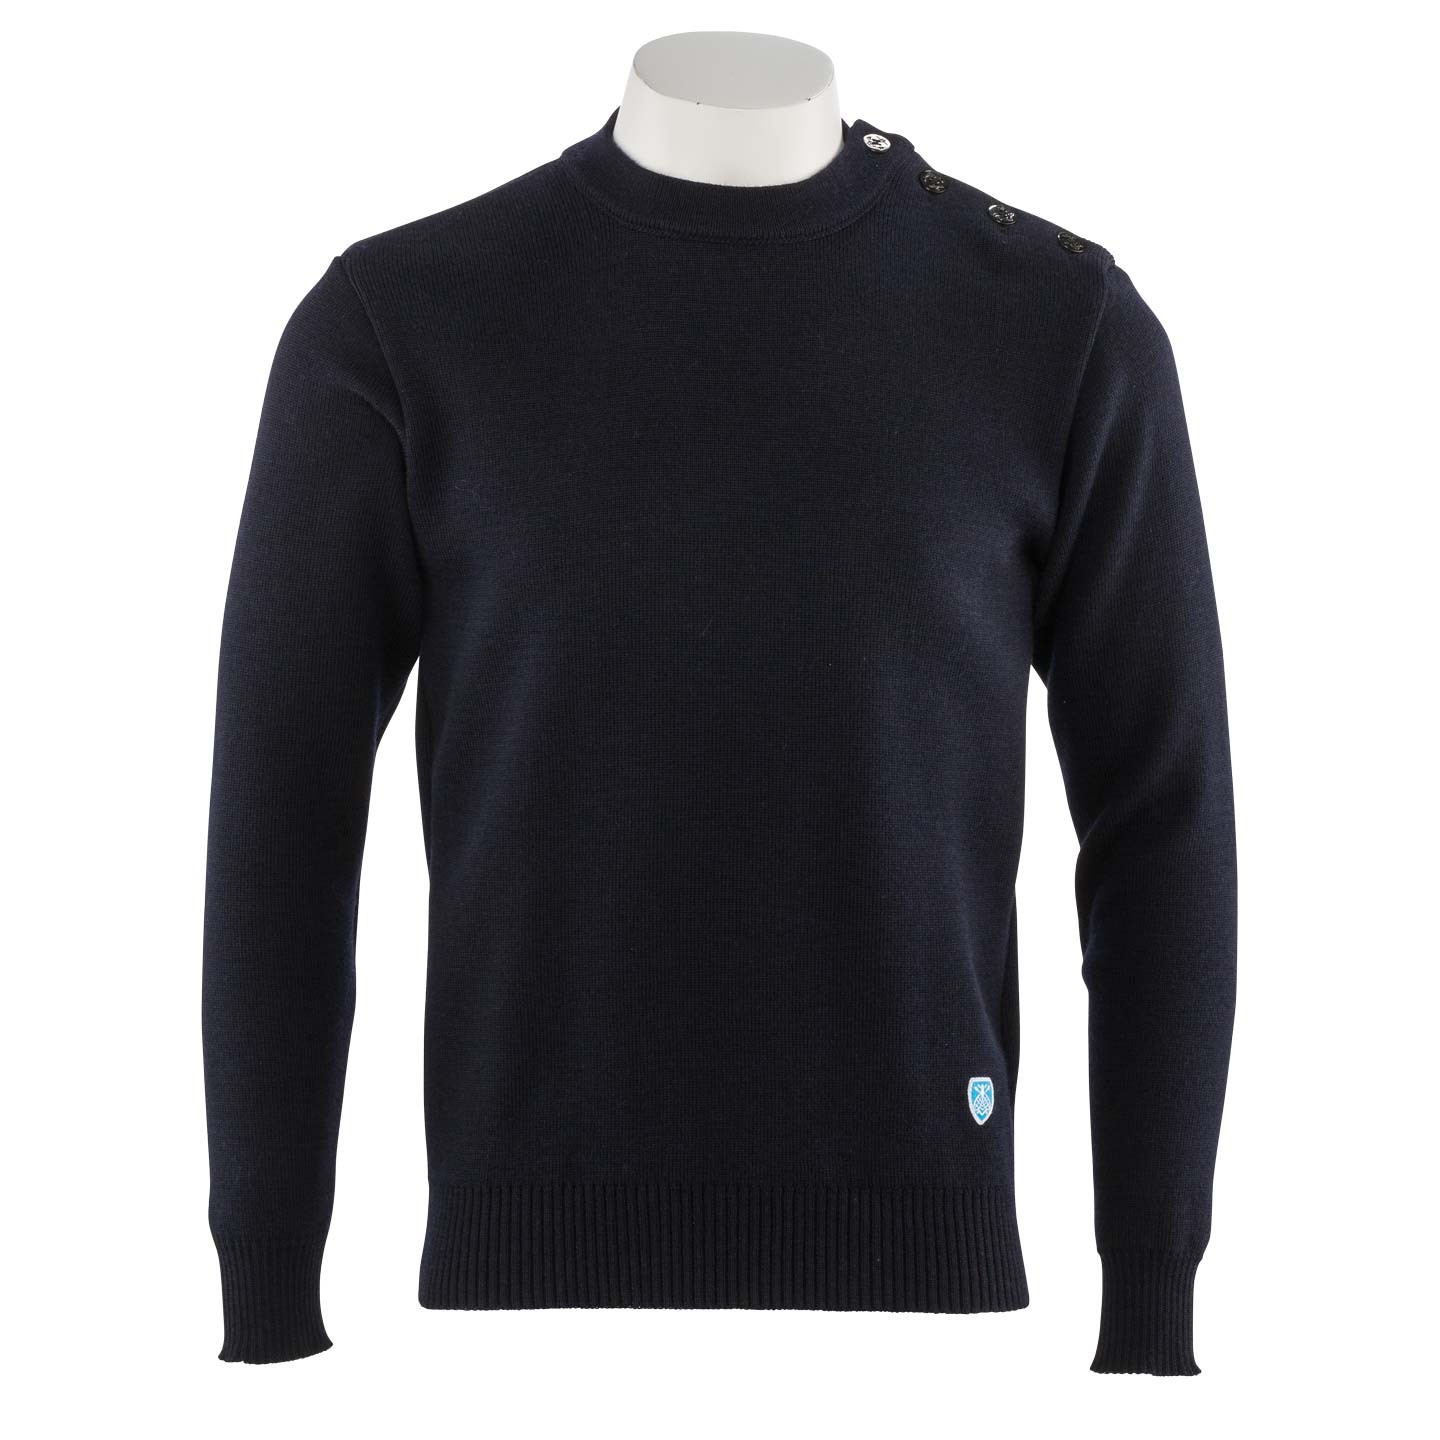 Pull 100% pure laine Marine made in France Orcival